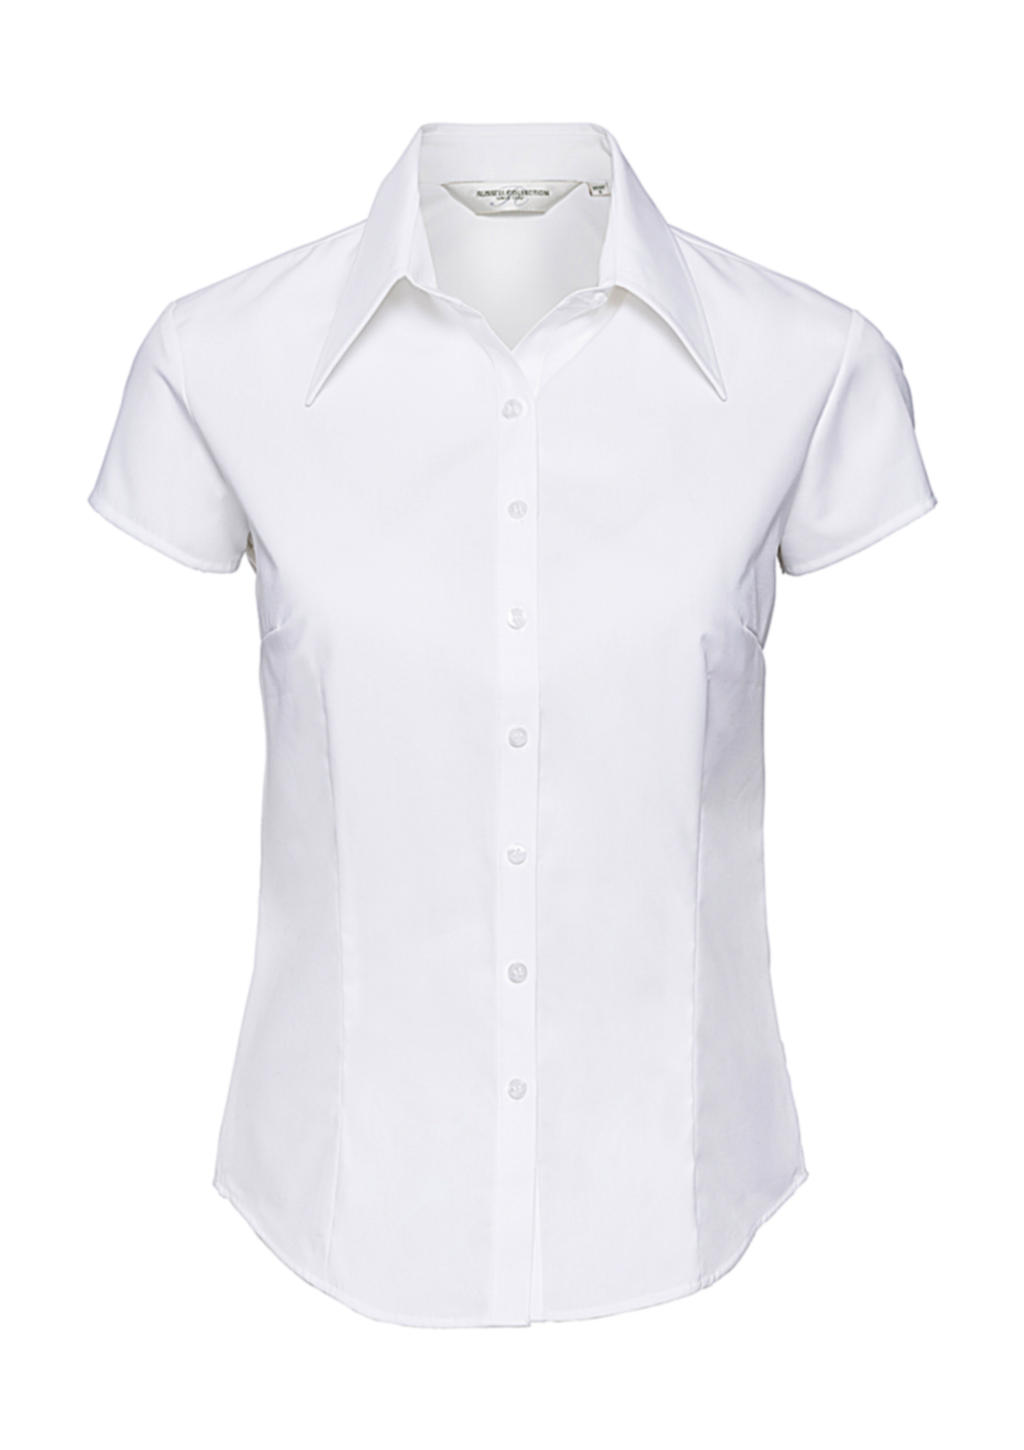  Ladies Tencel? Fitted Shirt in Farbe White